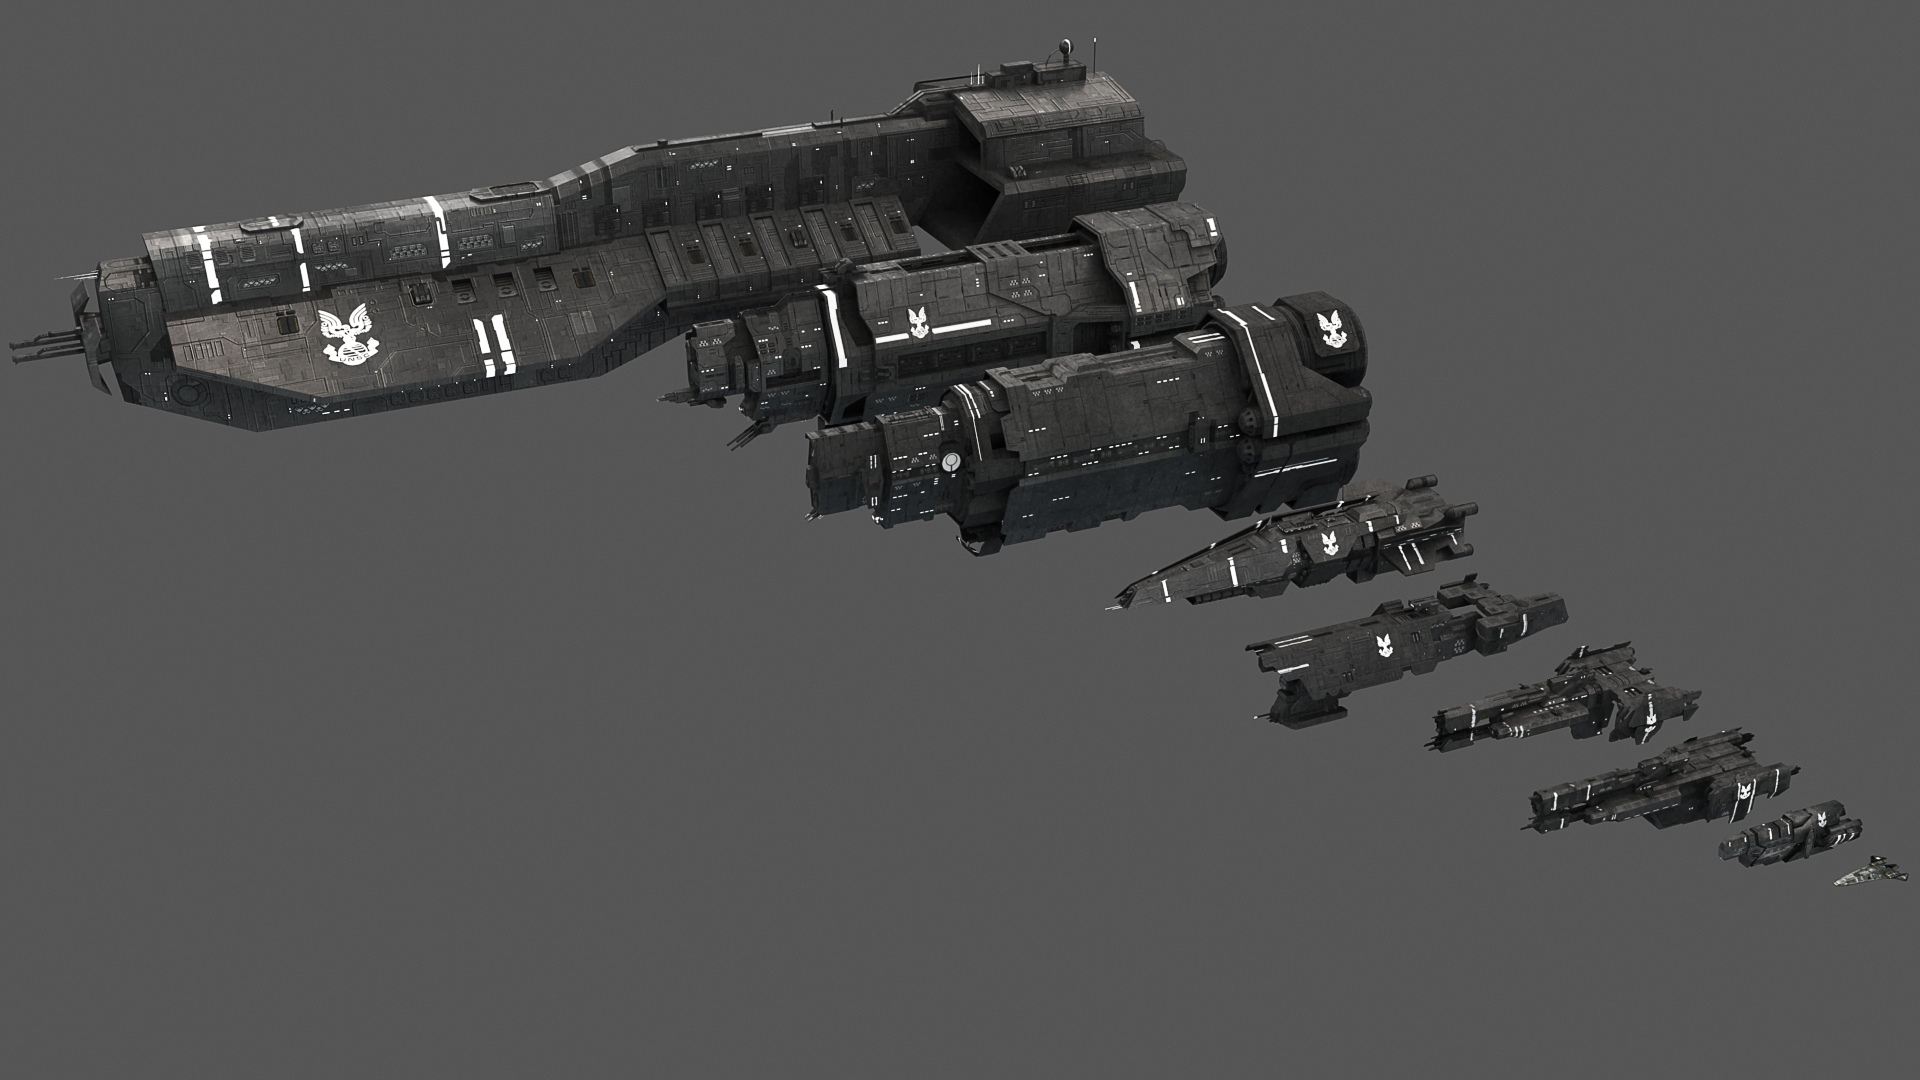 Unsc Ships